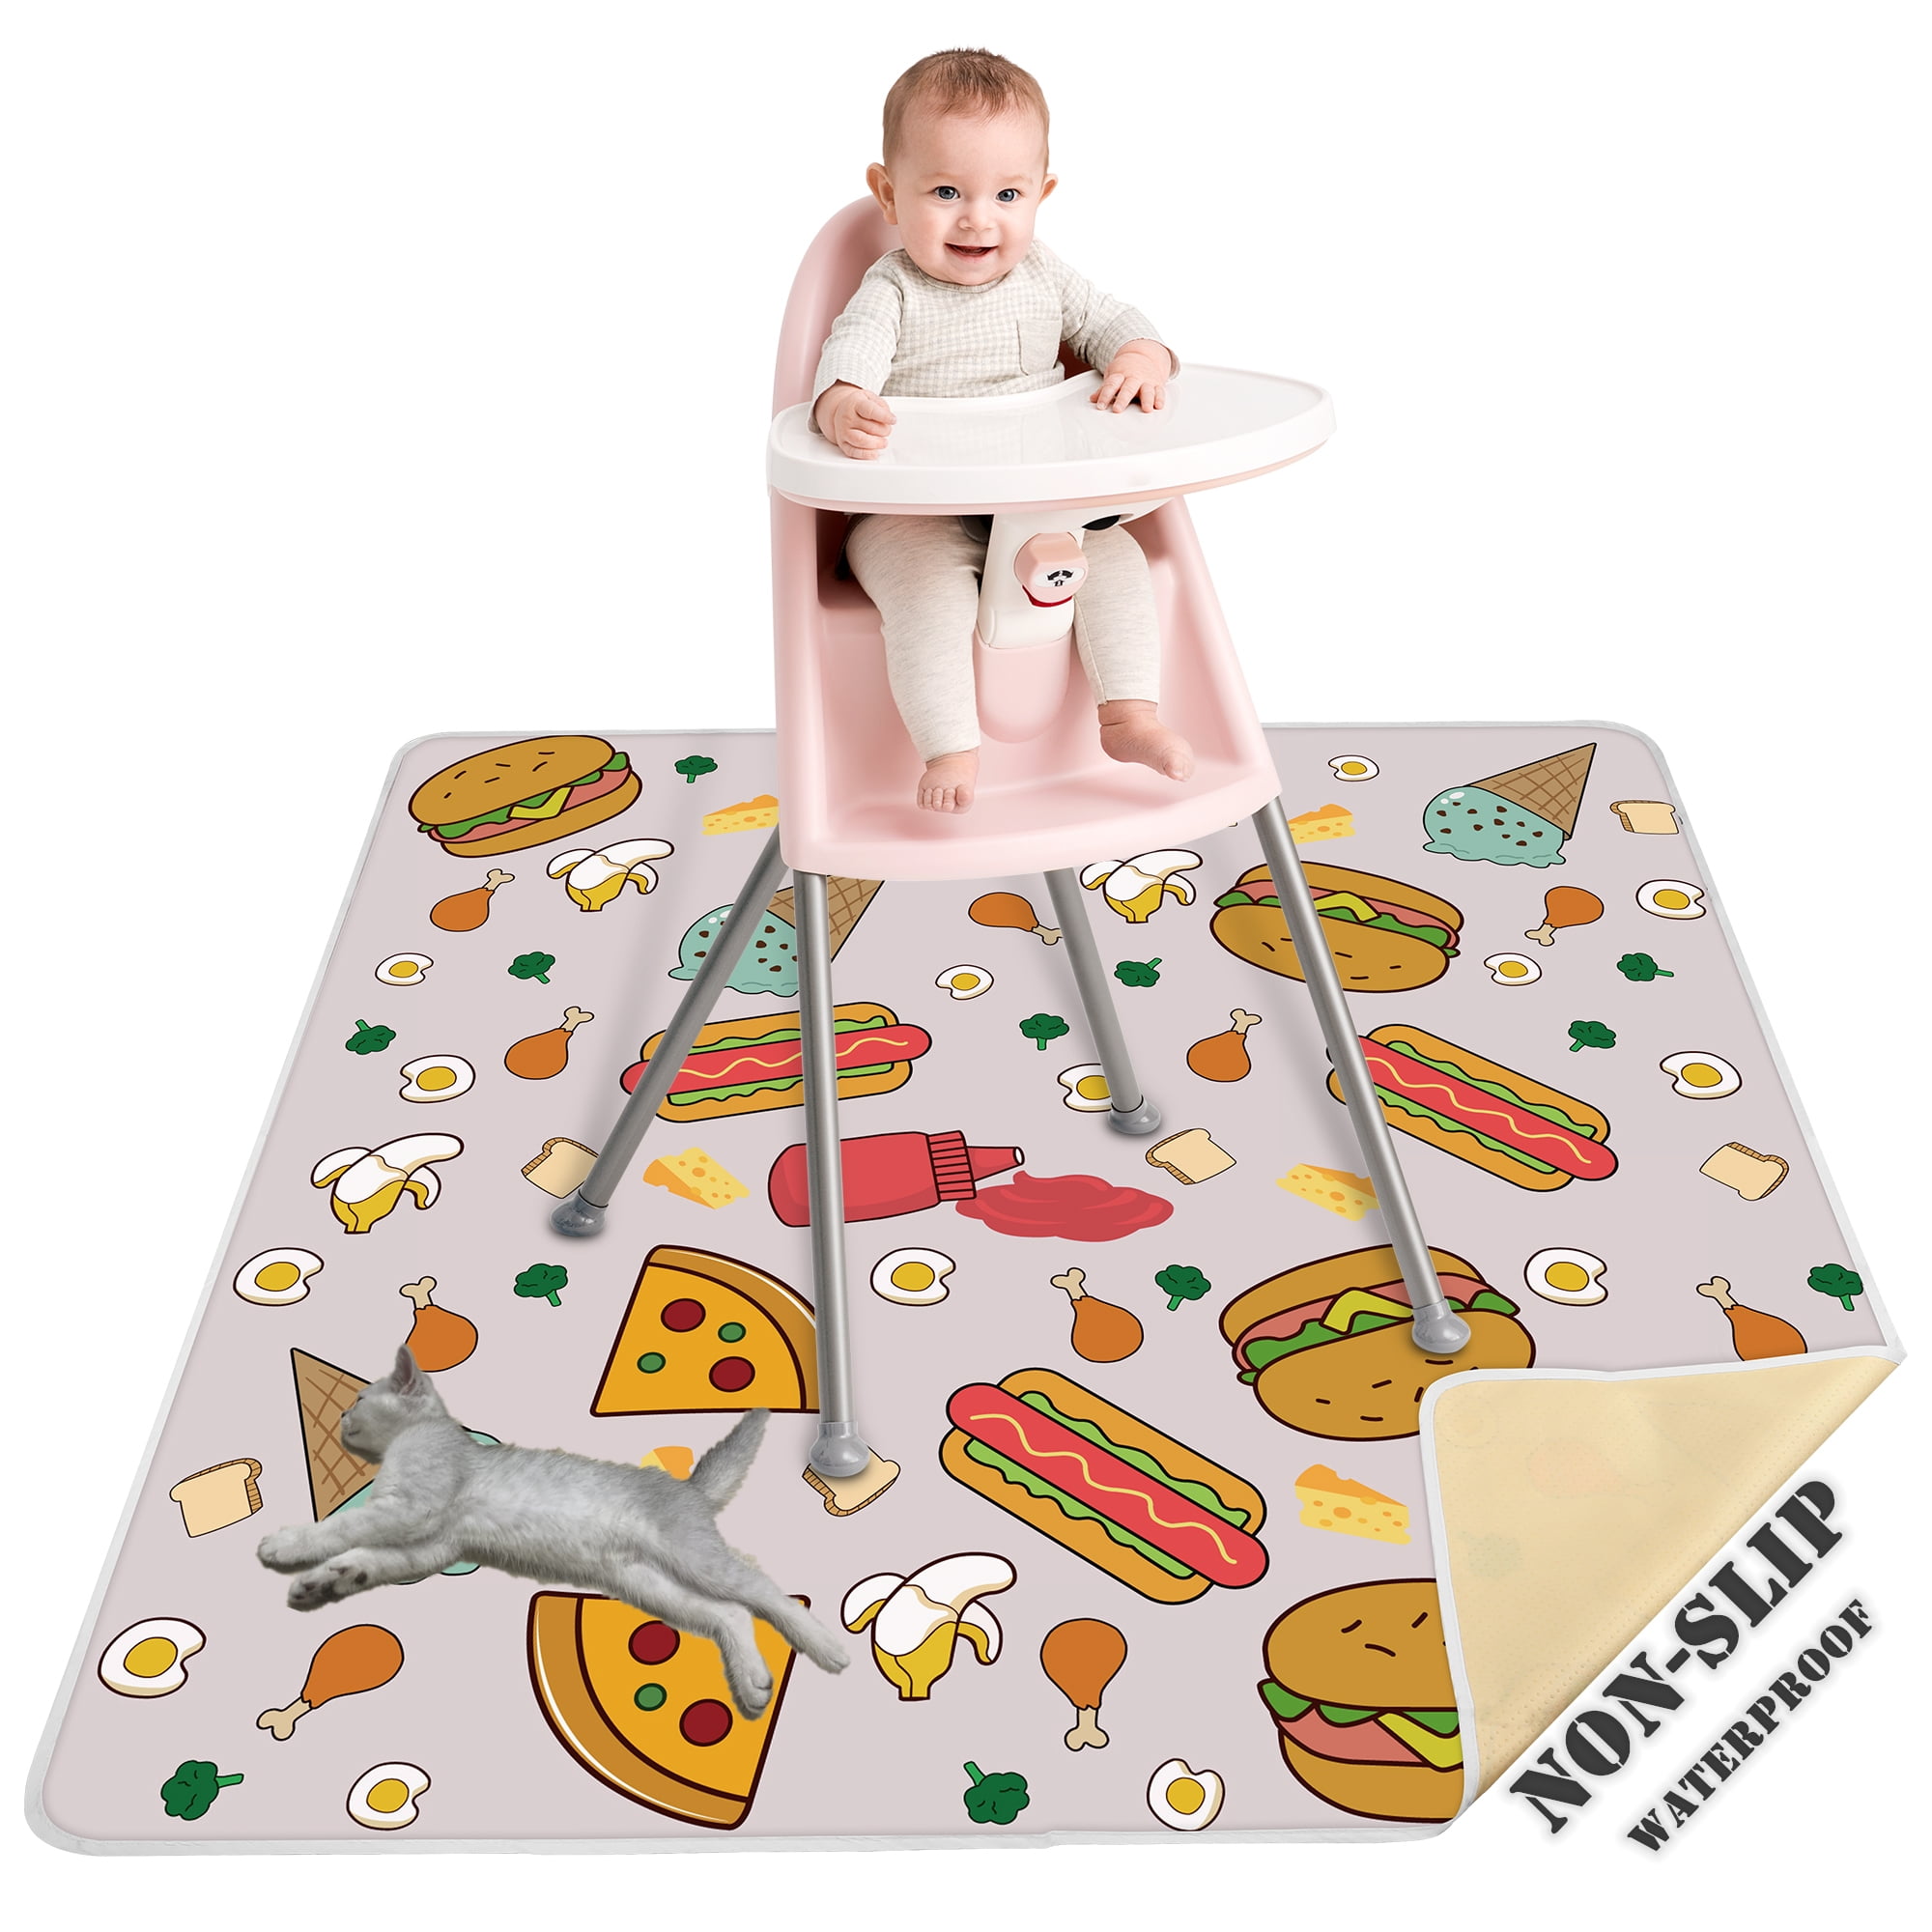 Beige Arrow Non-Slip Floor Splash Mat and Table Cloth 51 Multi-Purpose Waterproof Baby Splat Mat for Under High Chiar and Arts Portable Play Mat for Toddler 